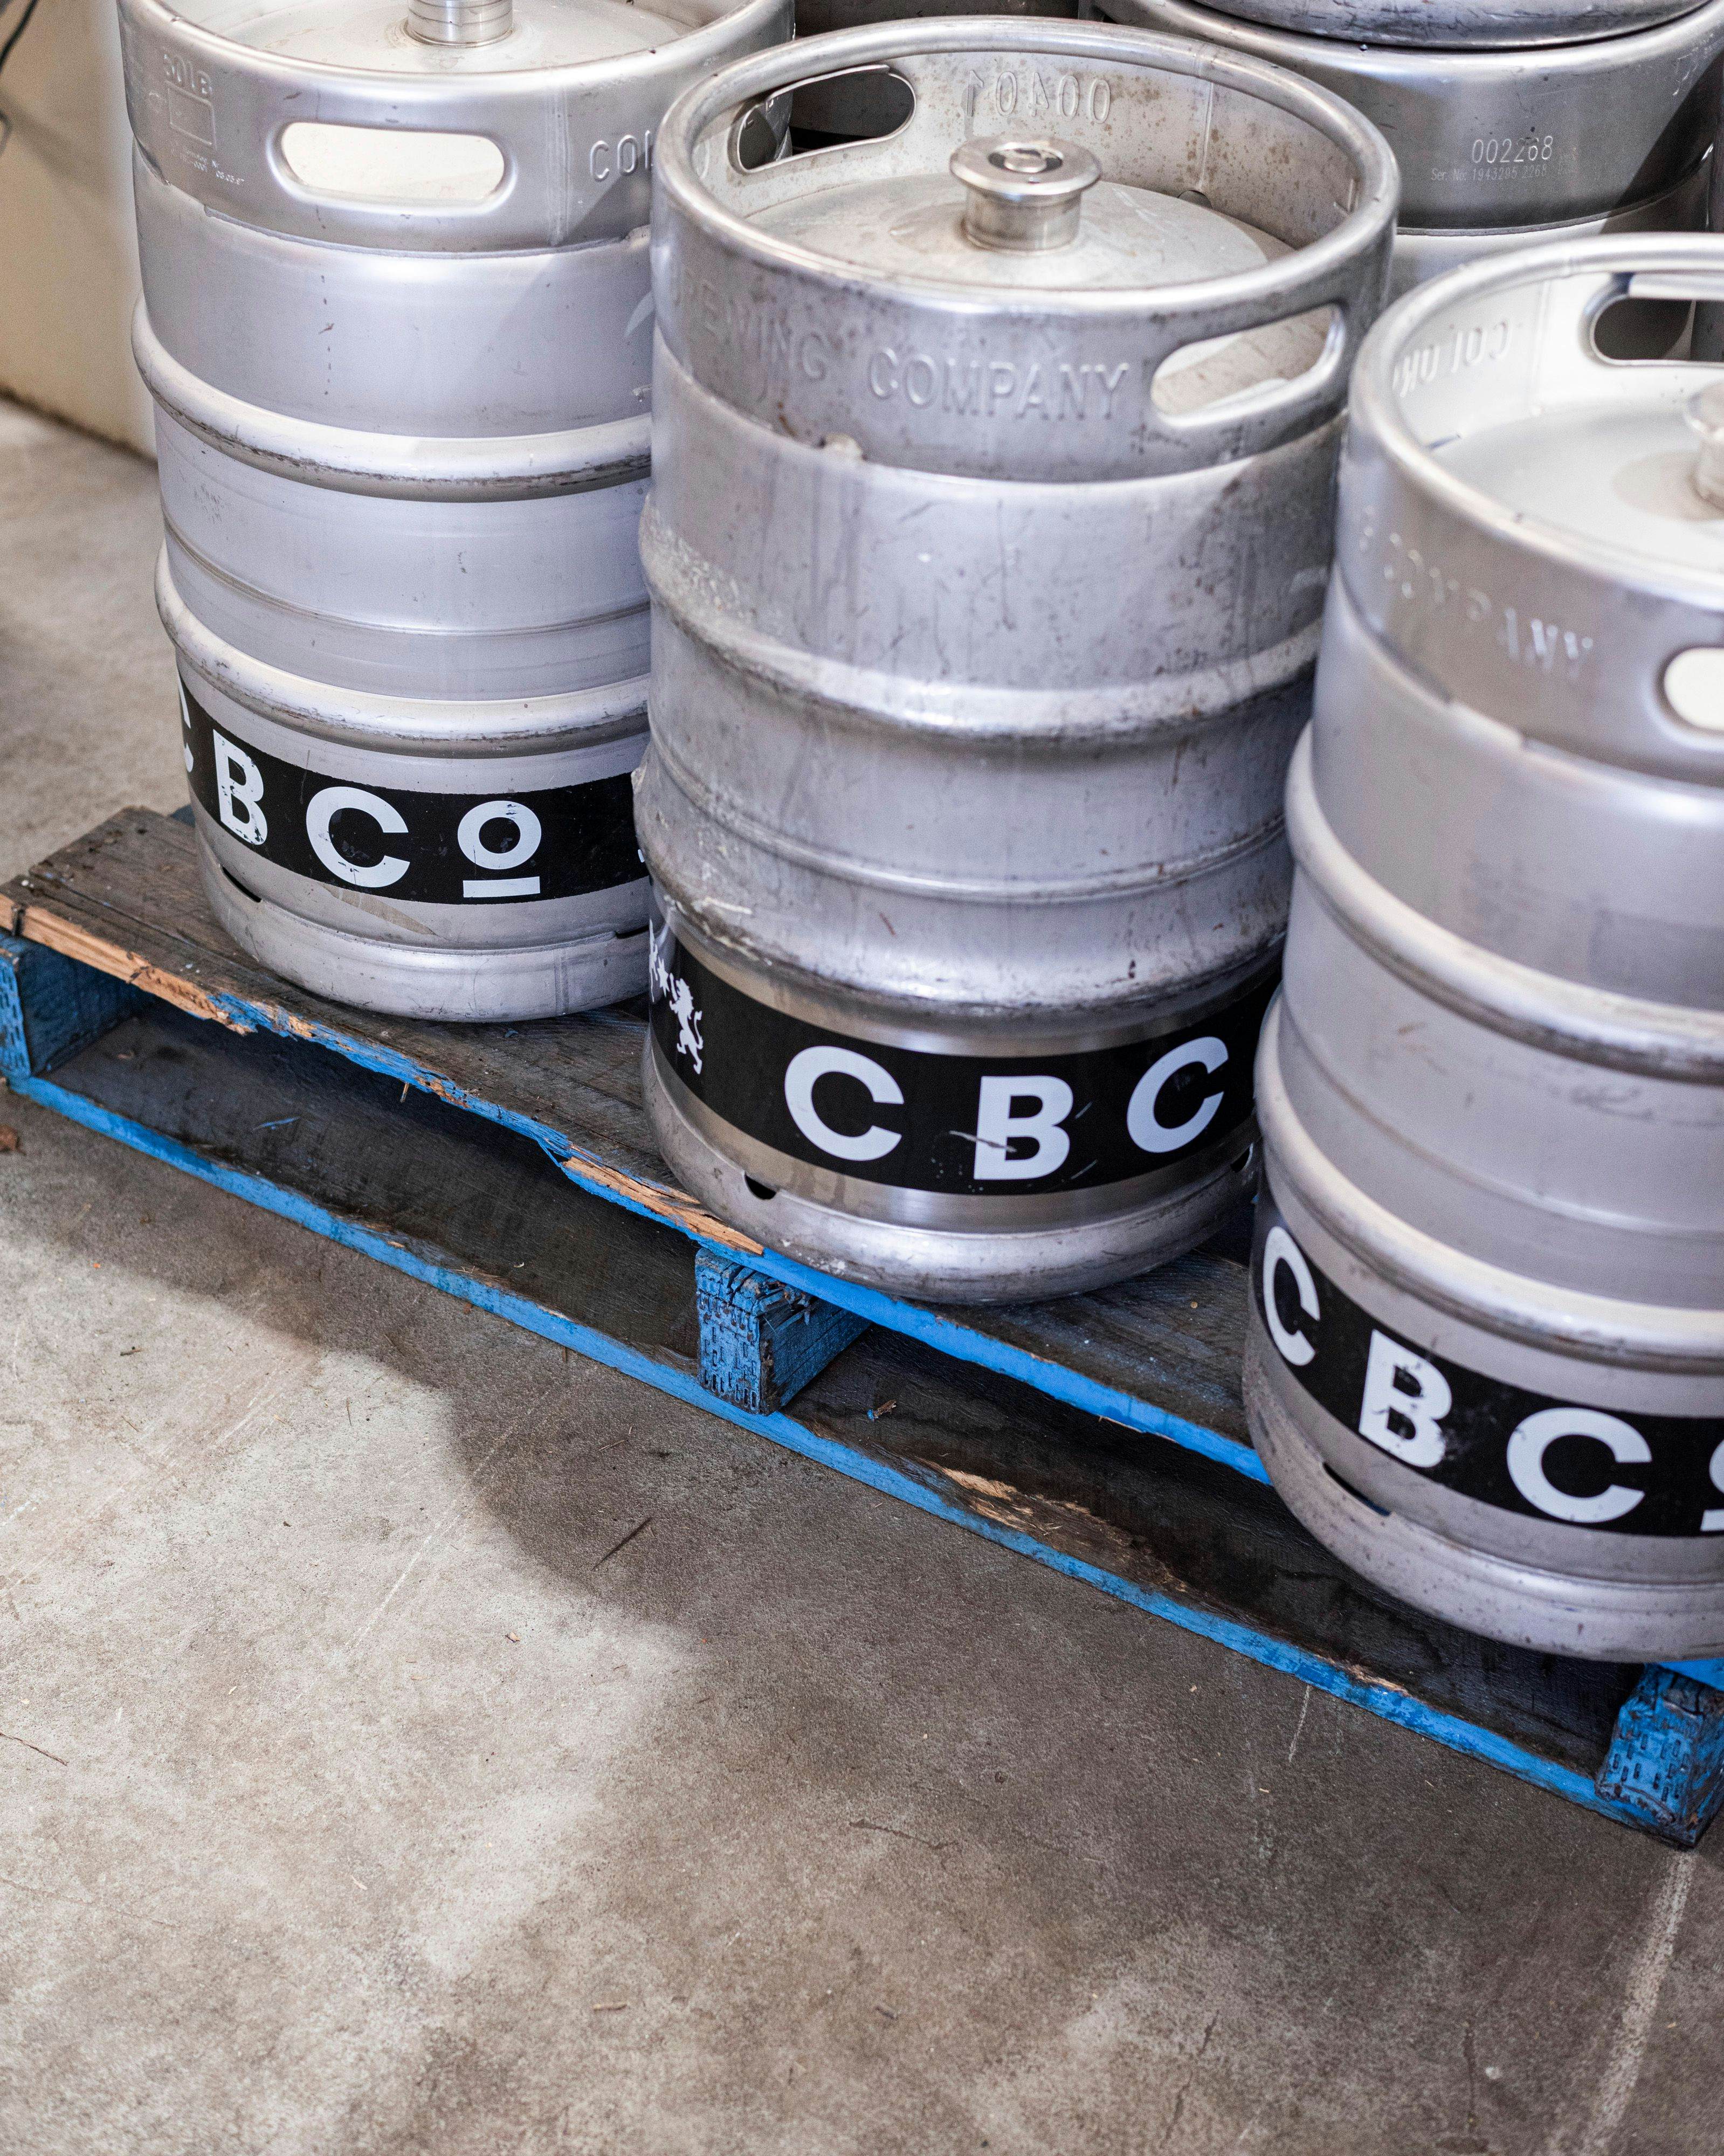 CBCo Kegs by Alter